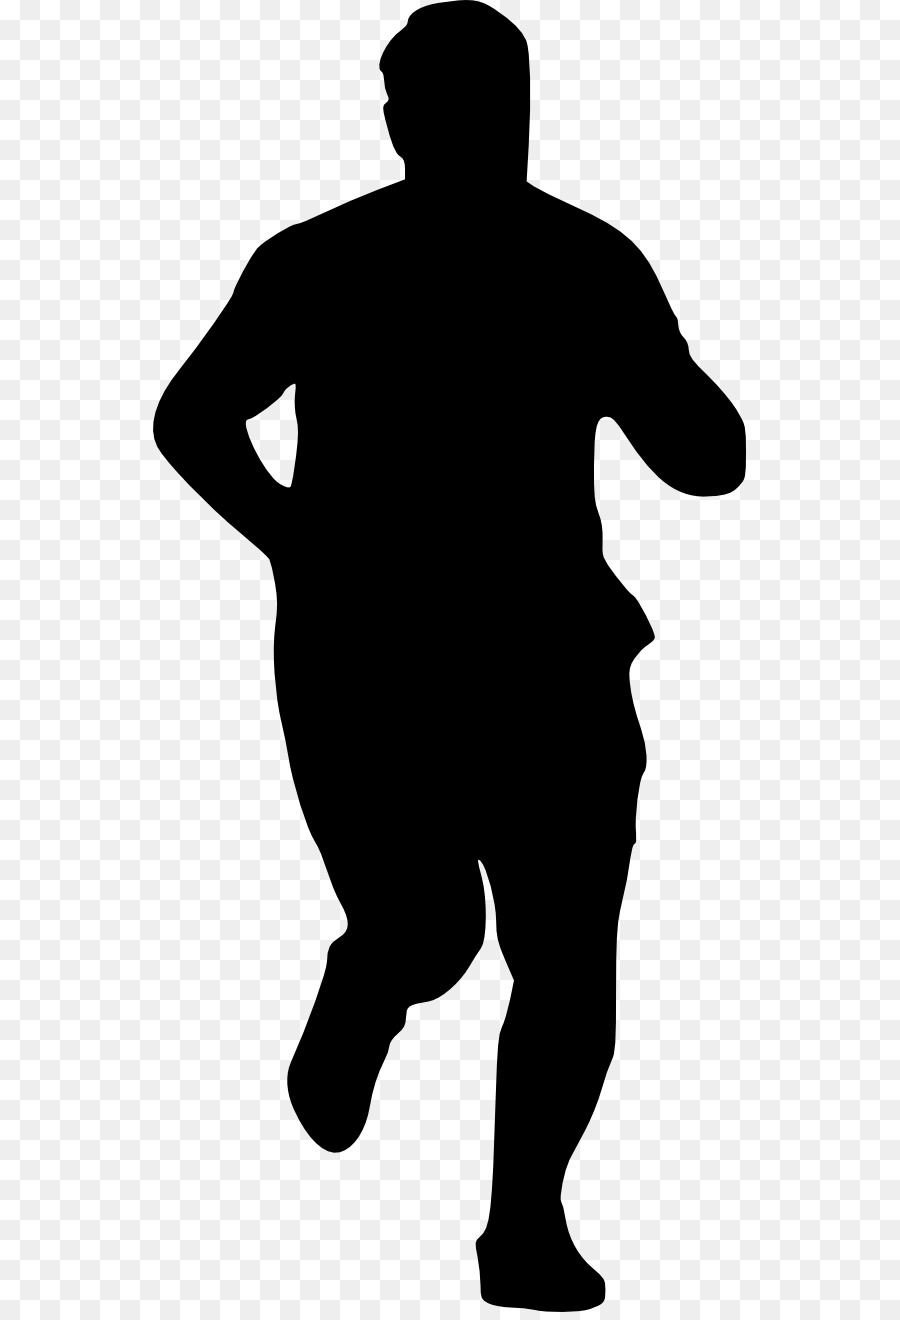 Silhouette Clip art - running man png download - 593*1312 - Free Transparent Silhouette png Download.